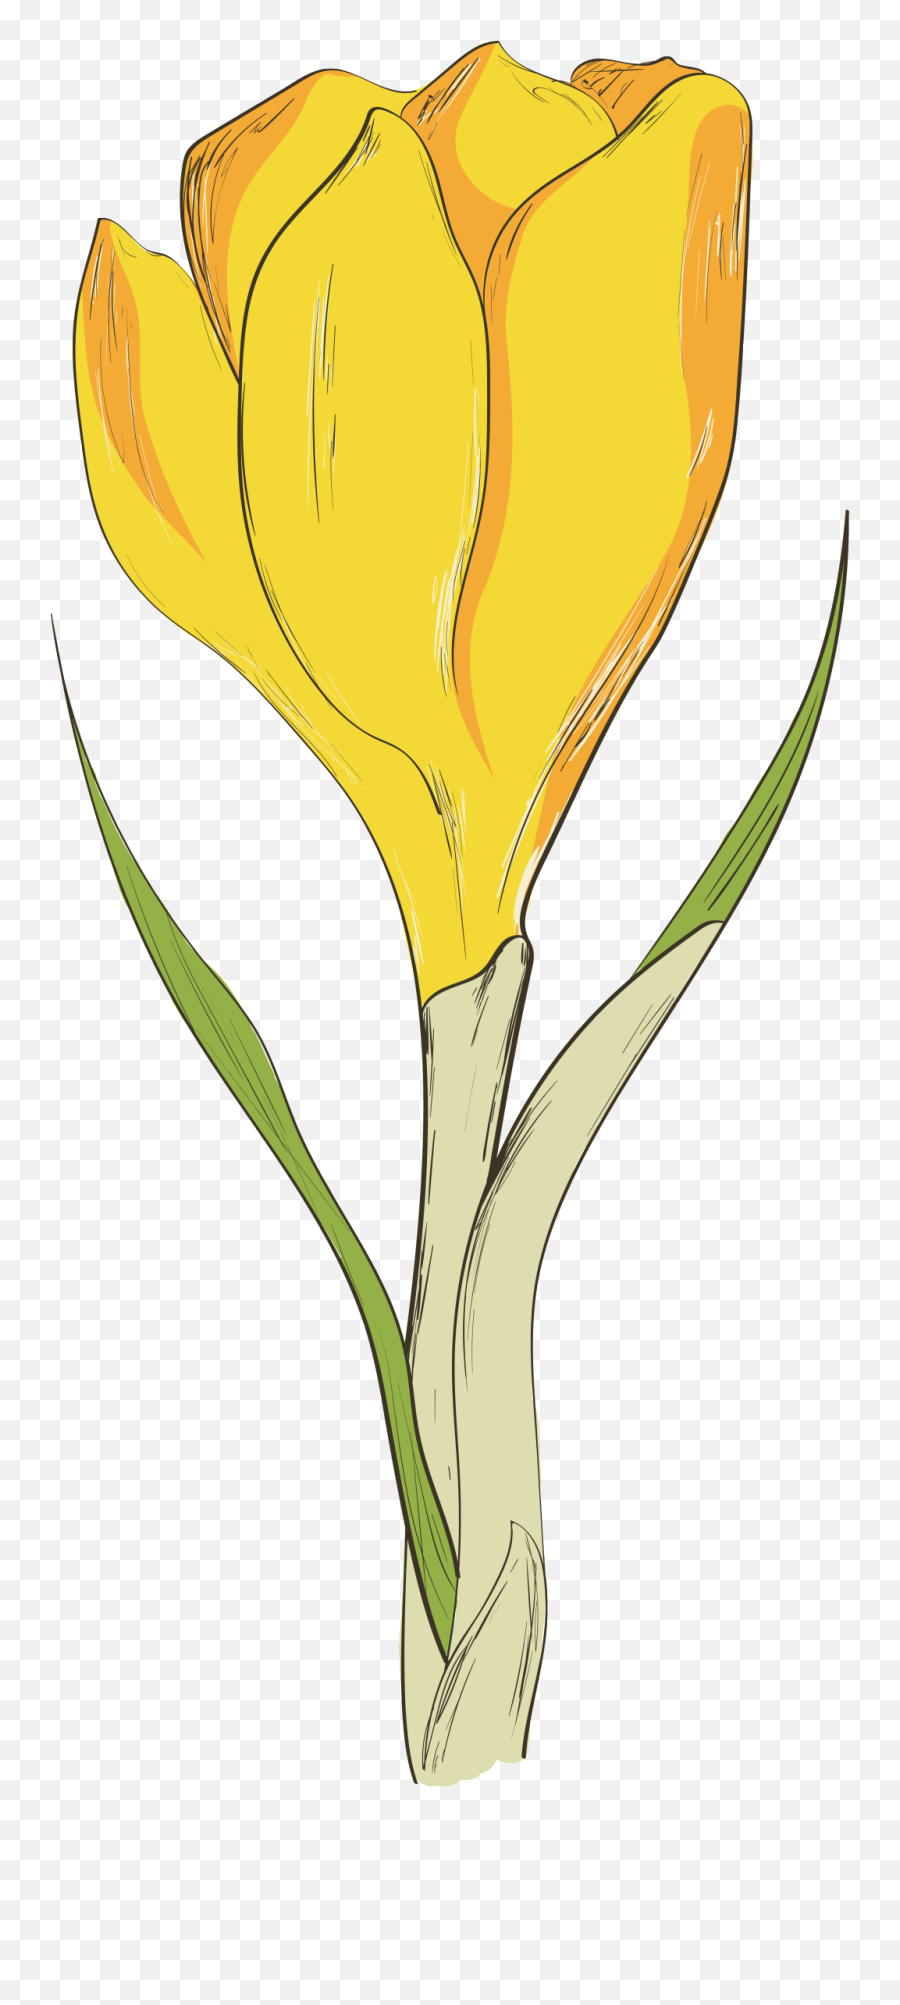 Download Yellow Flower Transparent Flower To Be Placed - Crocus Emoji,Yellow Flower Transparent